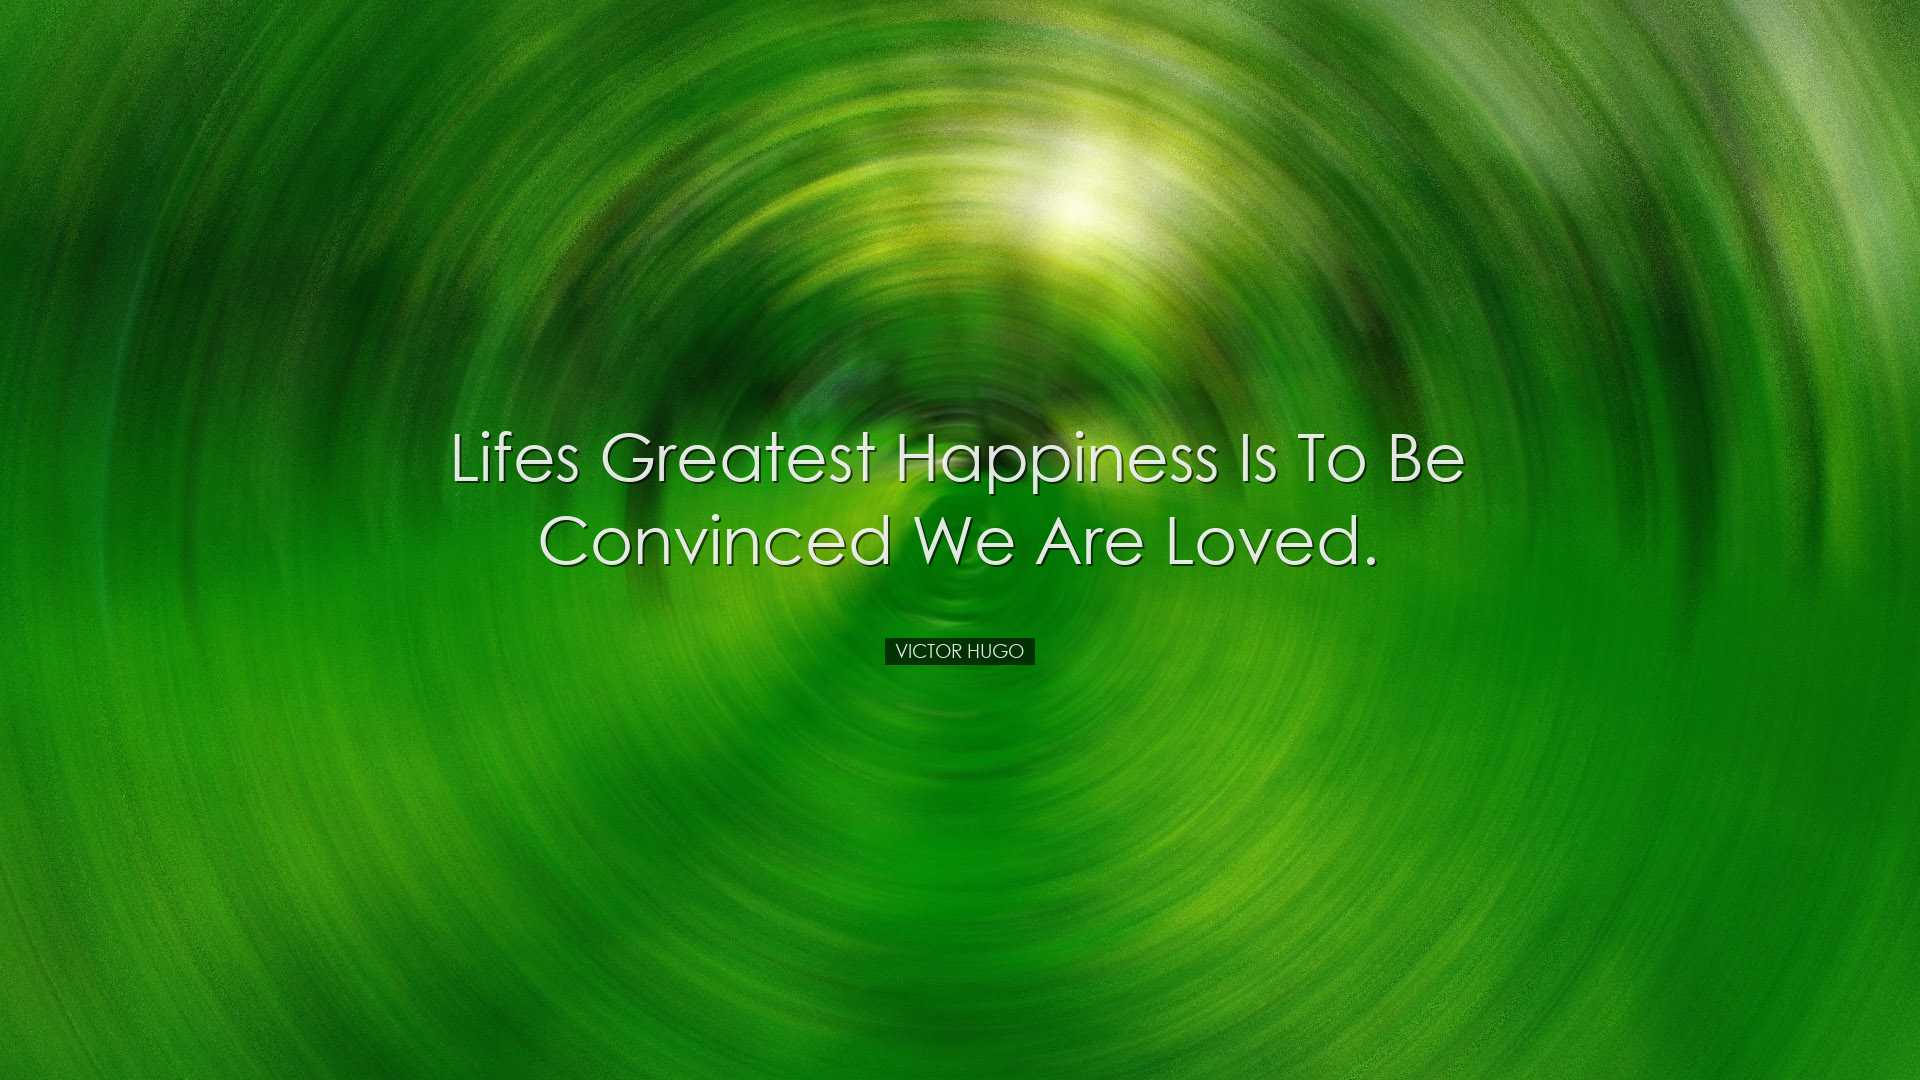 Lifes greatest happiness is to be convinced we are loved. - Victor